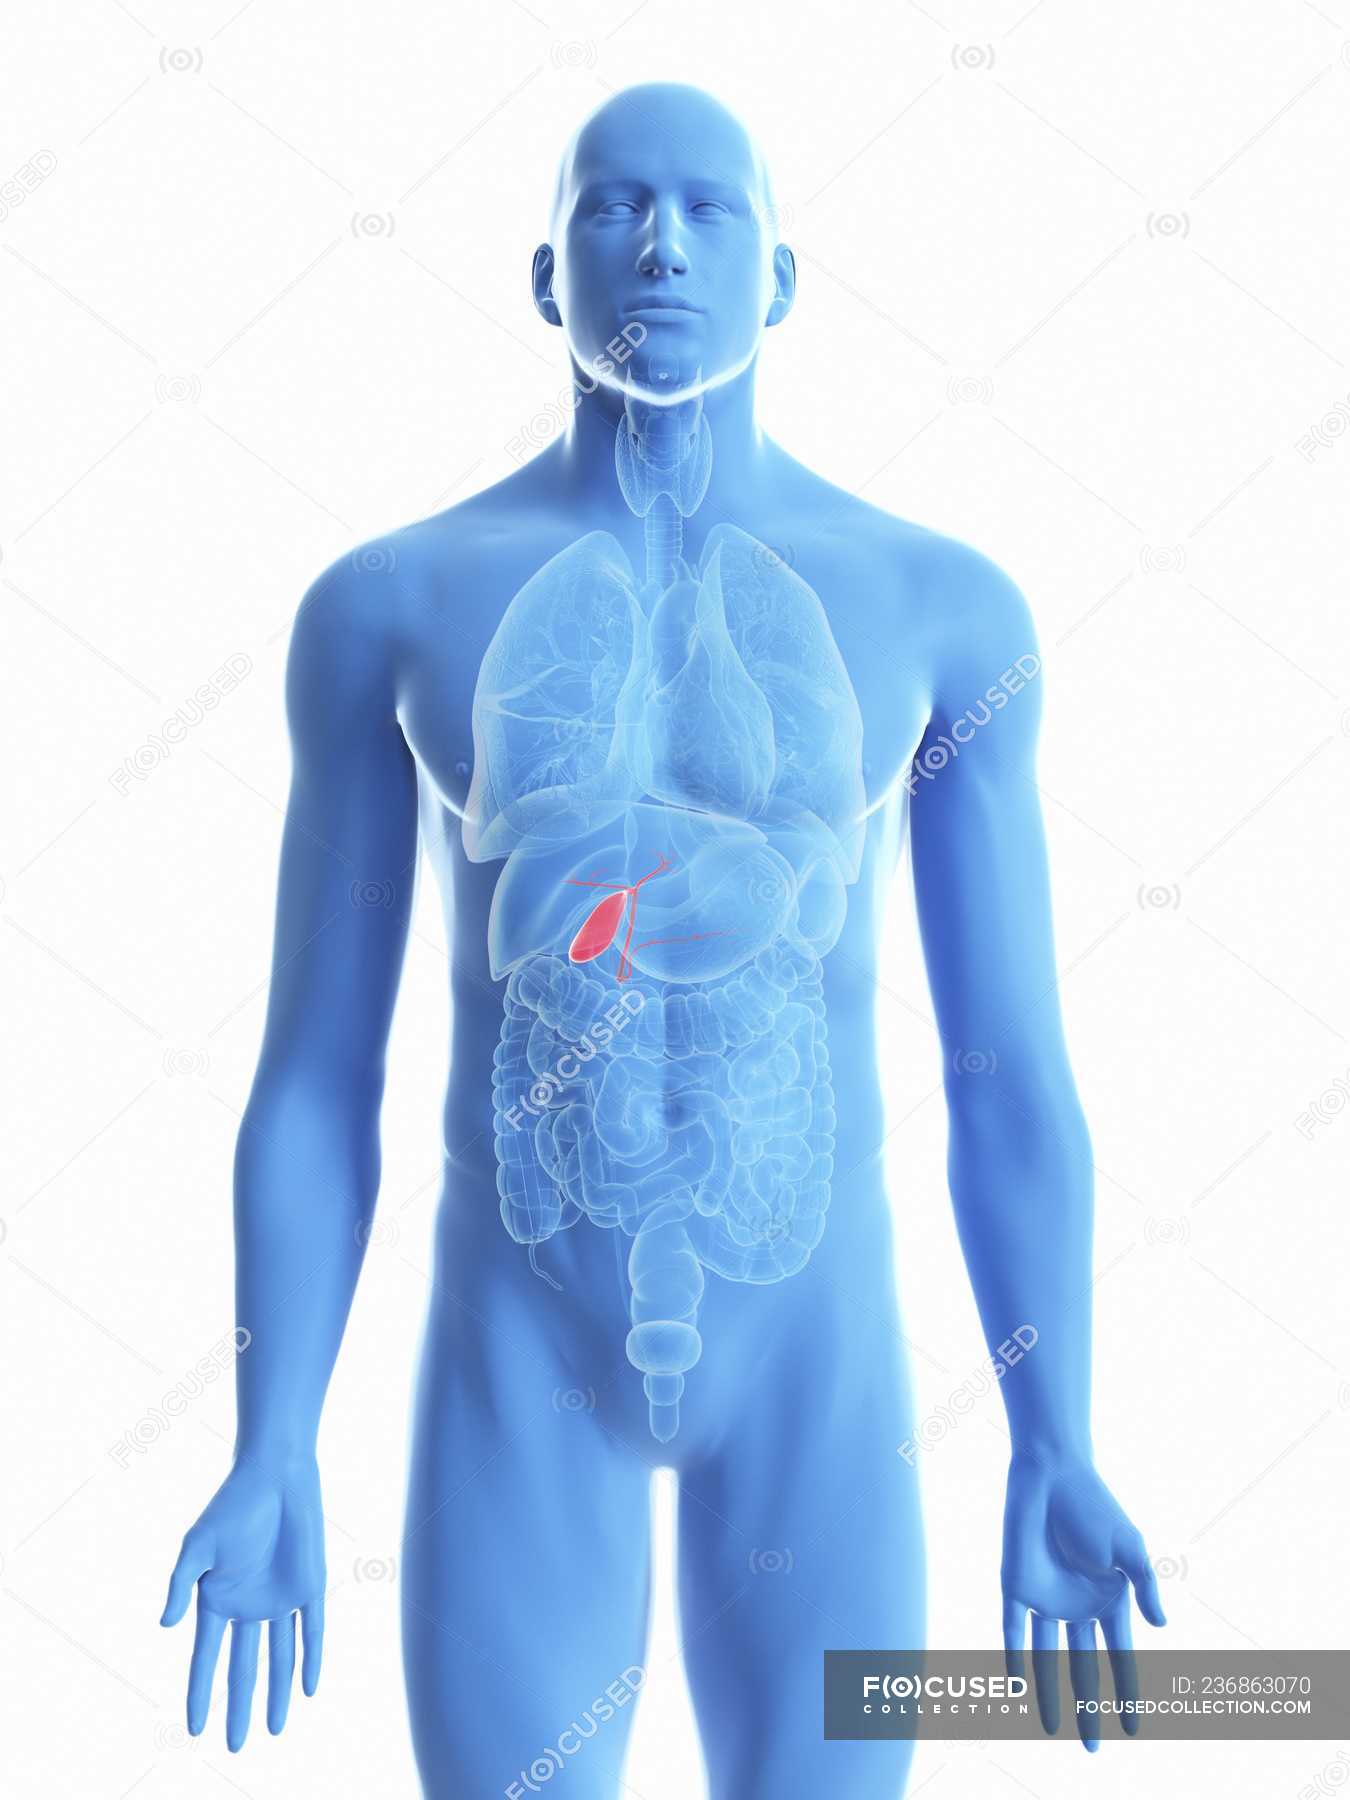 Illustration of gallbladder in male body silhouette on white background ...